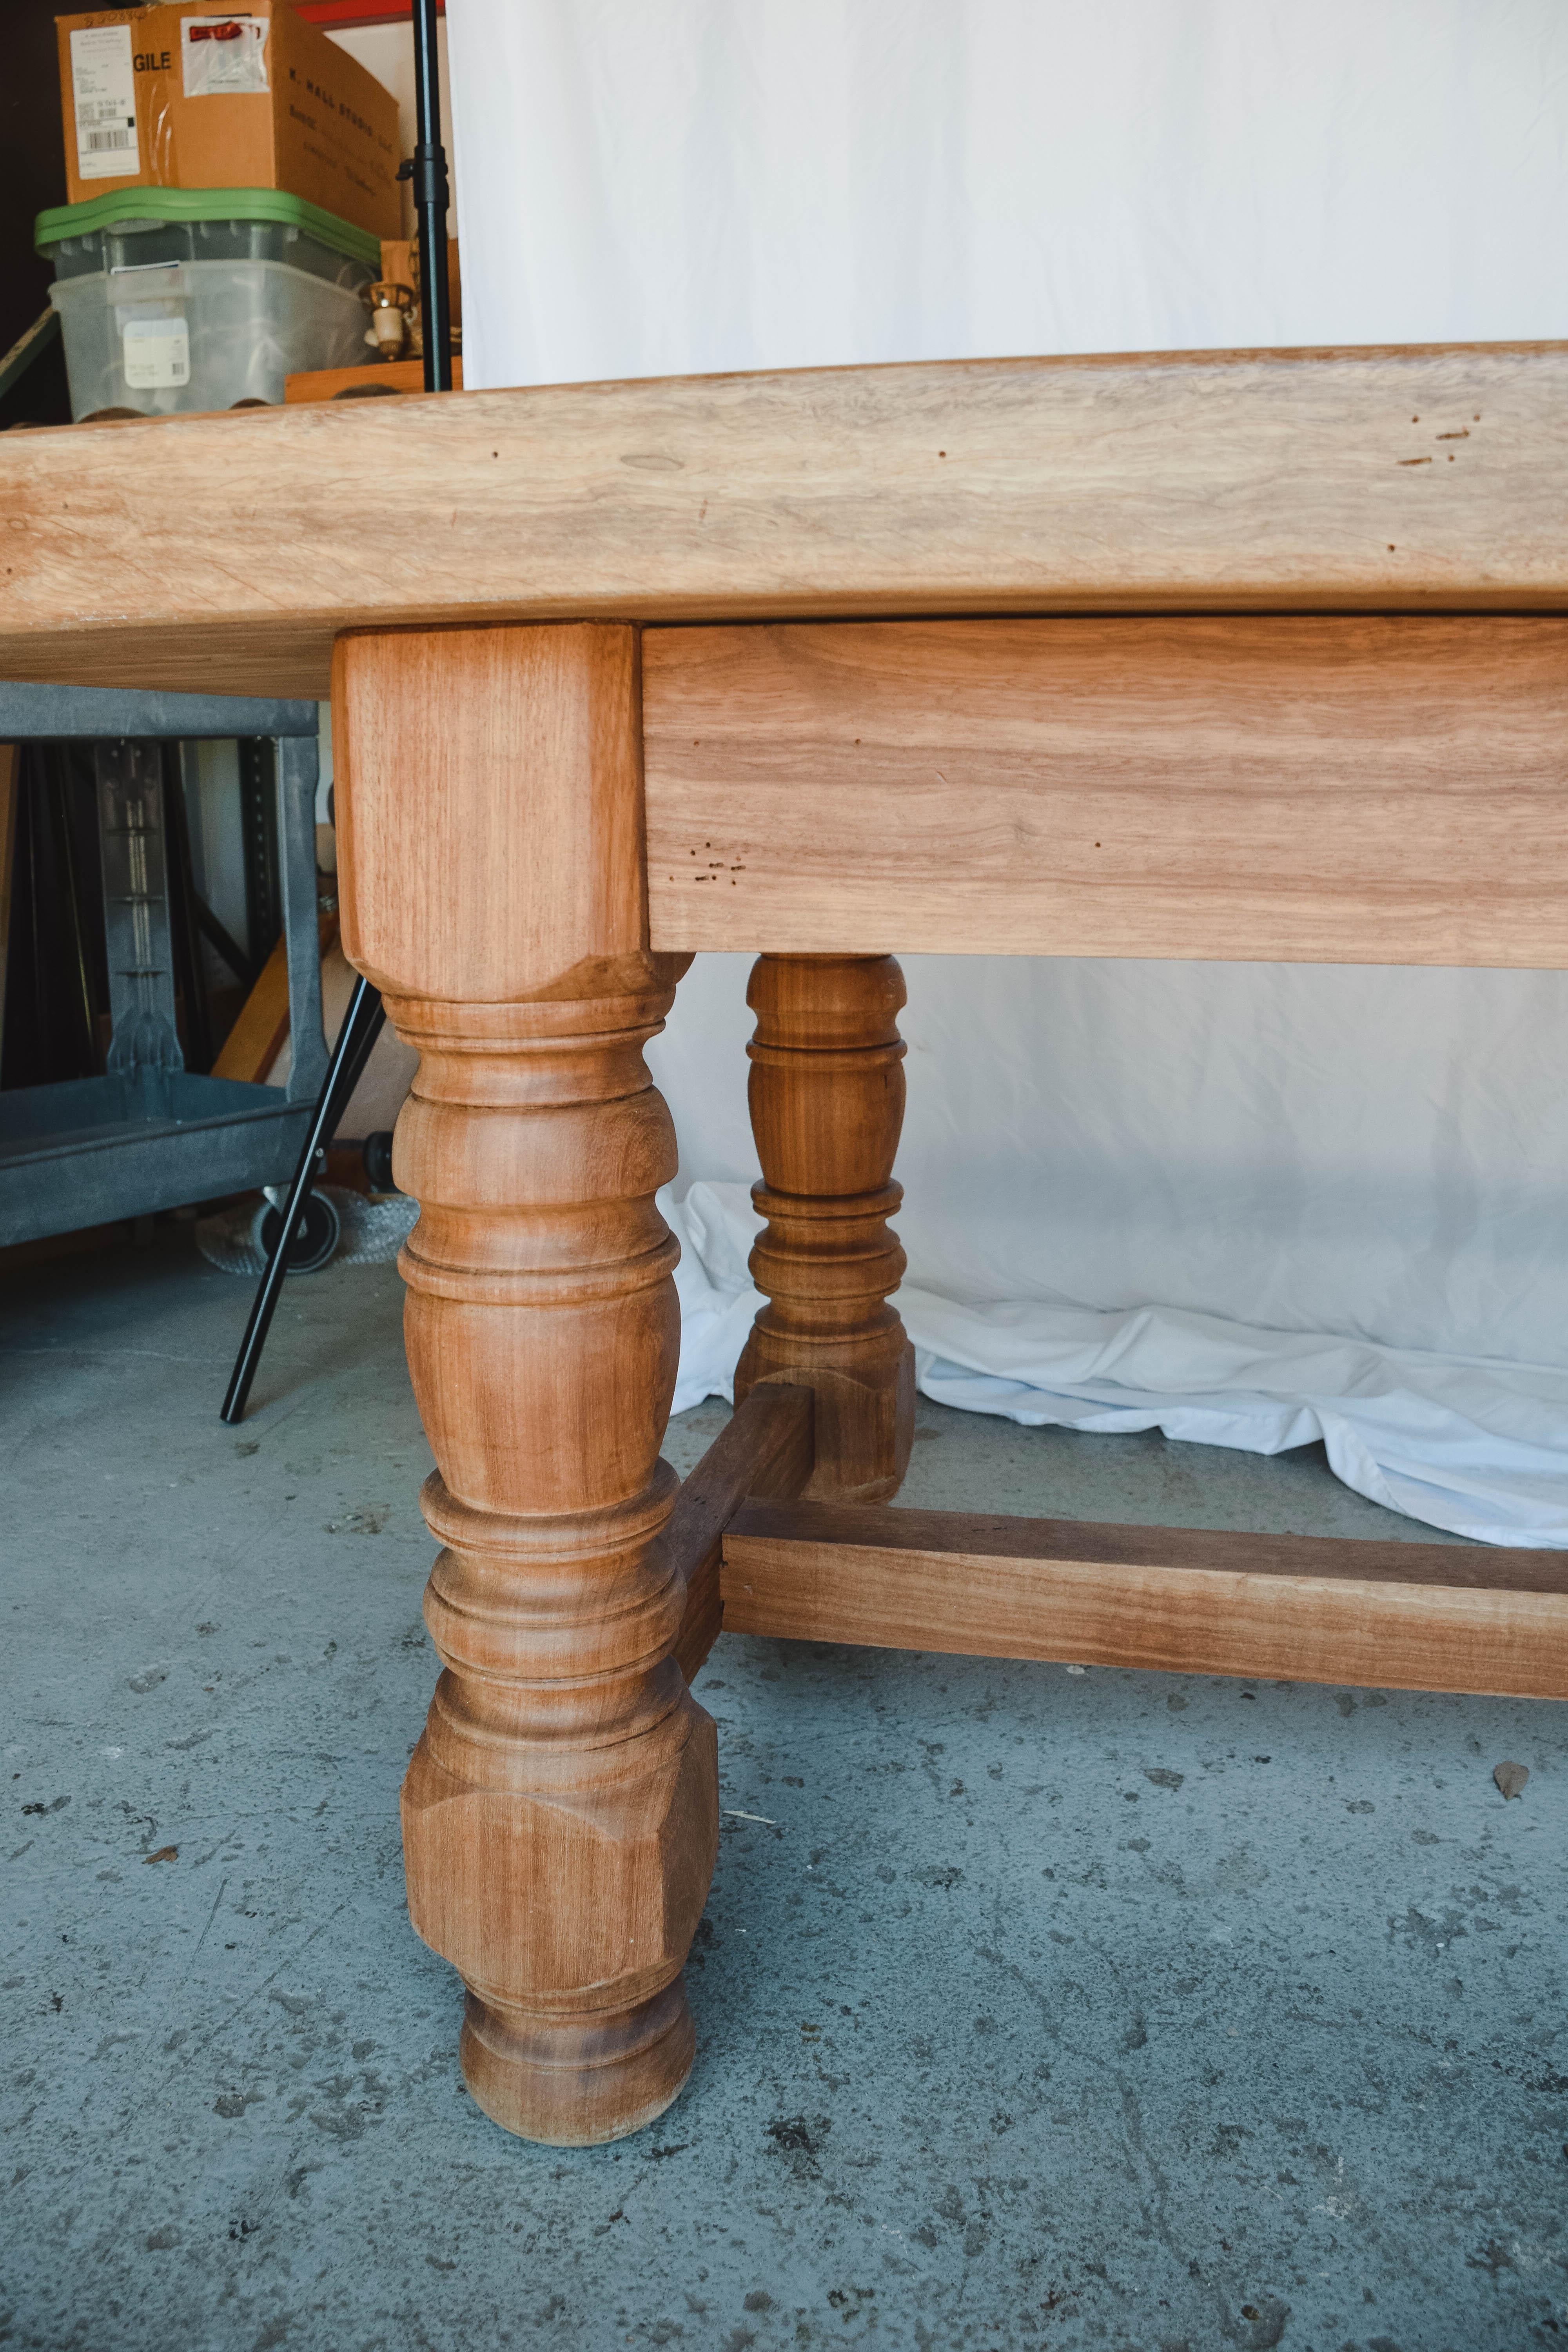 Found in the South of France, this vintage French work table is constructed with a thick solid wood top and turned legs. A large size, makes this table ideal for a kitchen work surface or island. The wood pegged bottom stretcher only adds to the